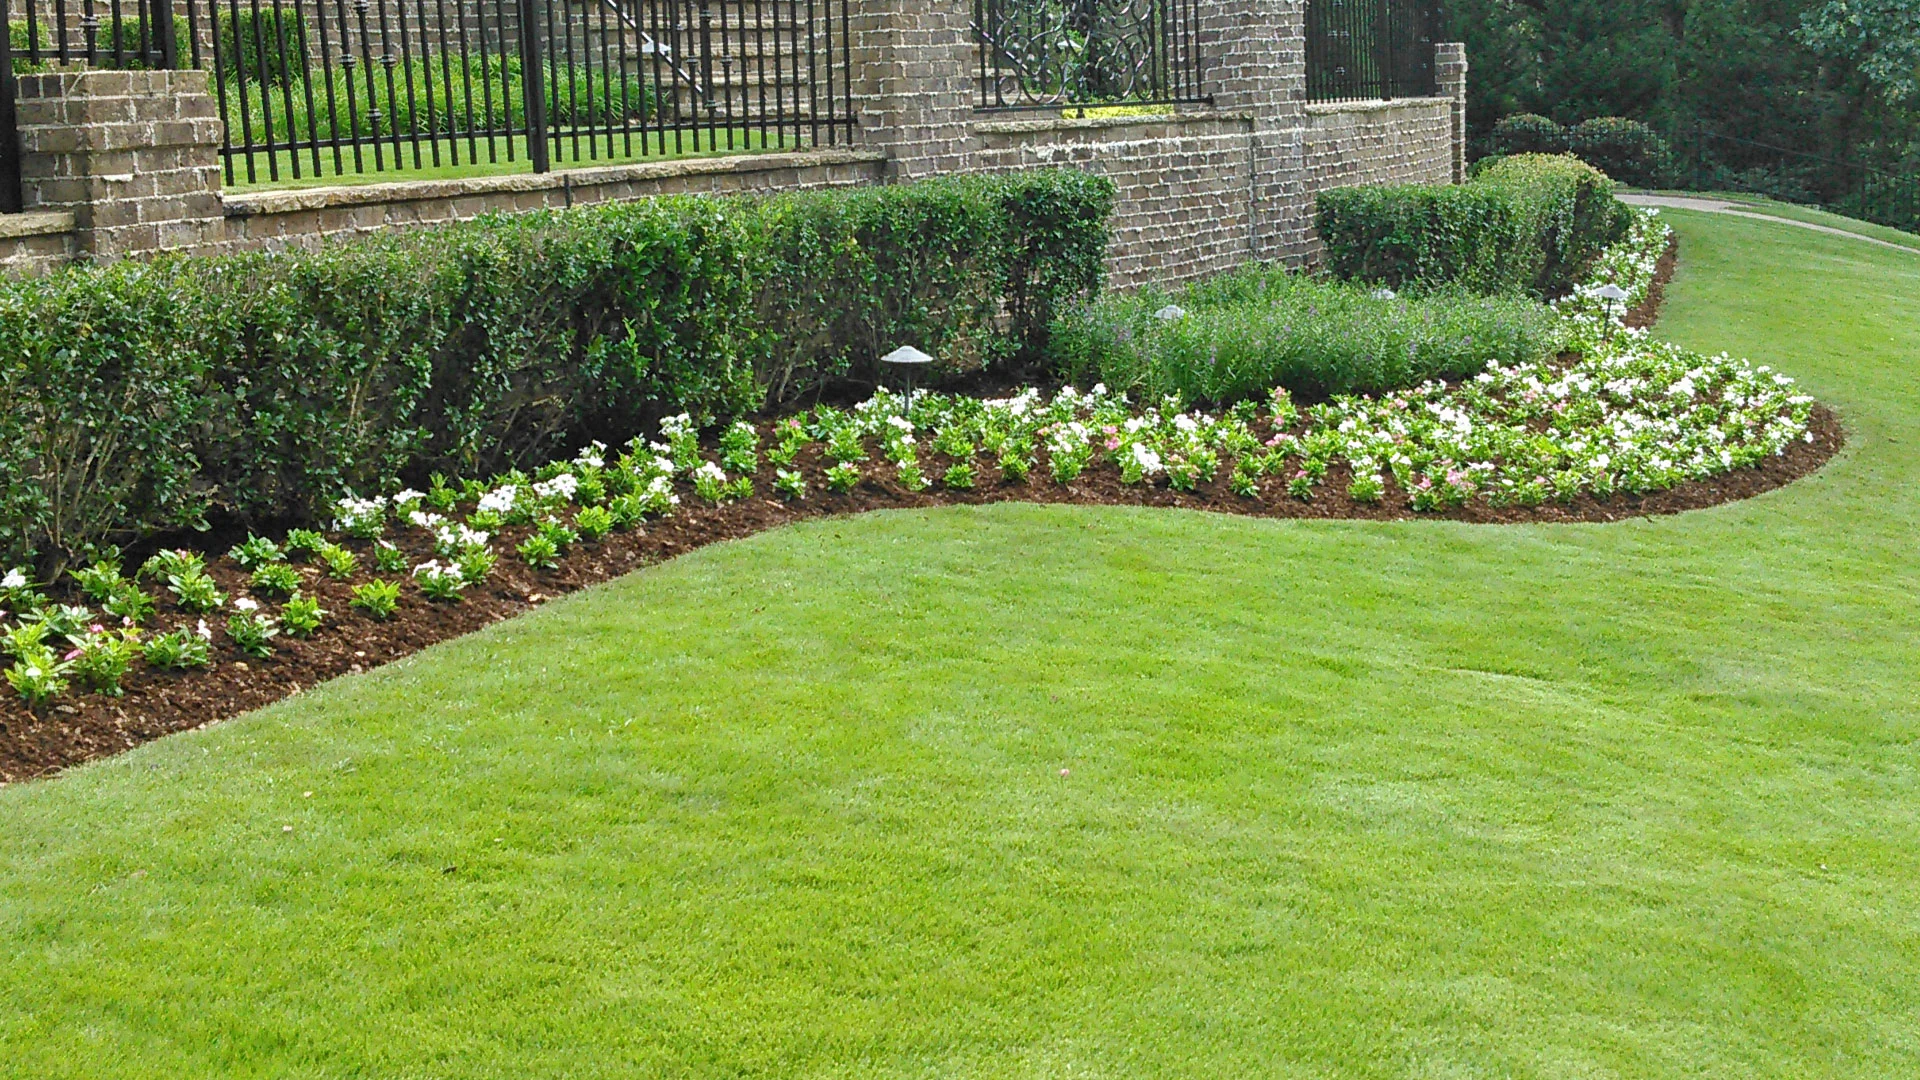 Our team planted spring annuals at this home located in Buckhead, GA.